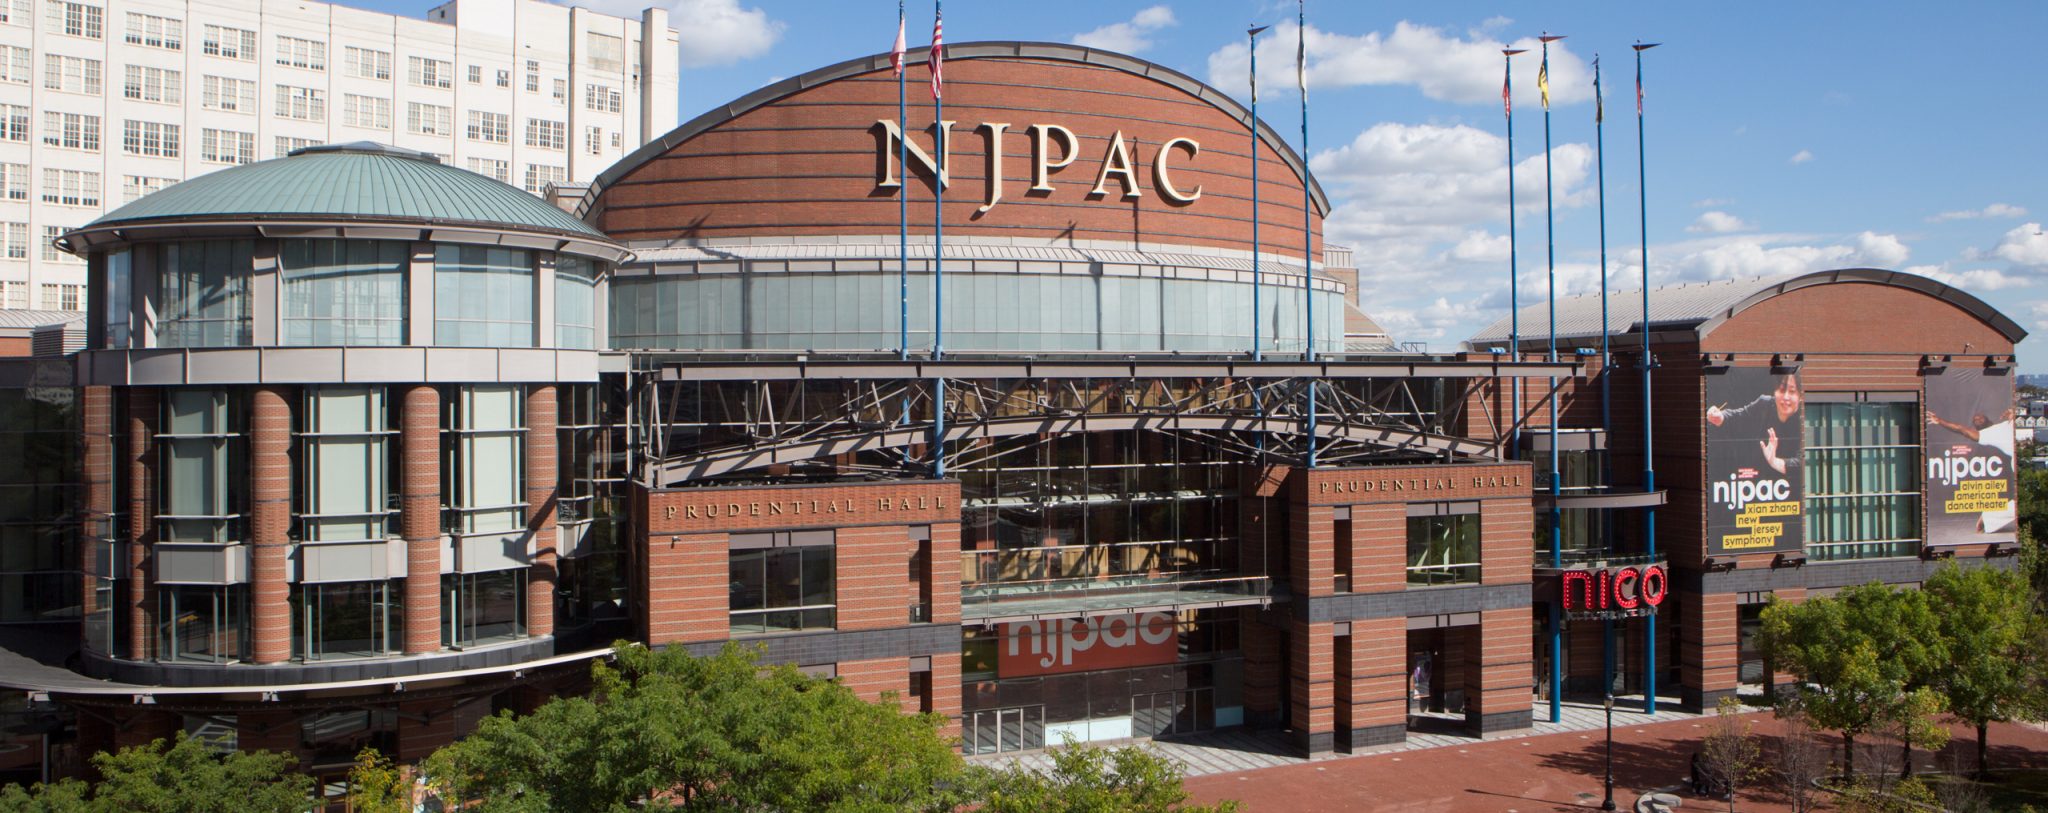 Welcoming a New Member: New Jersey Performing Arts Center (NJPAC